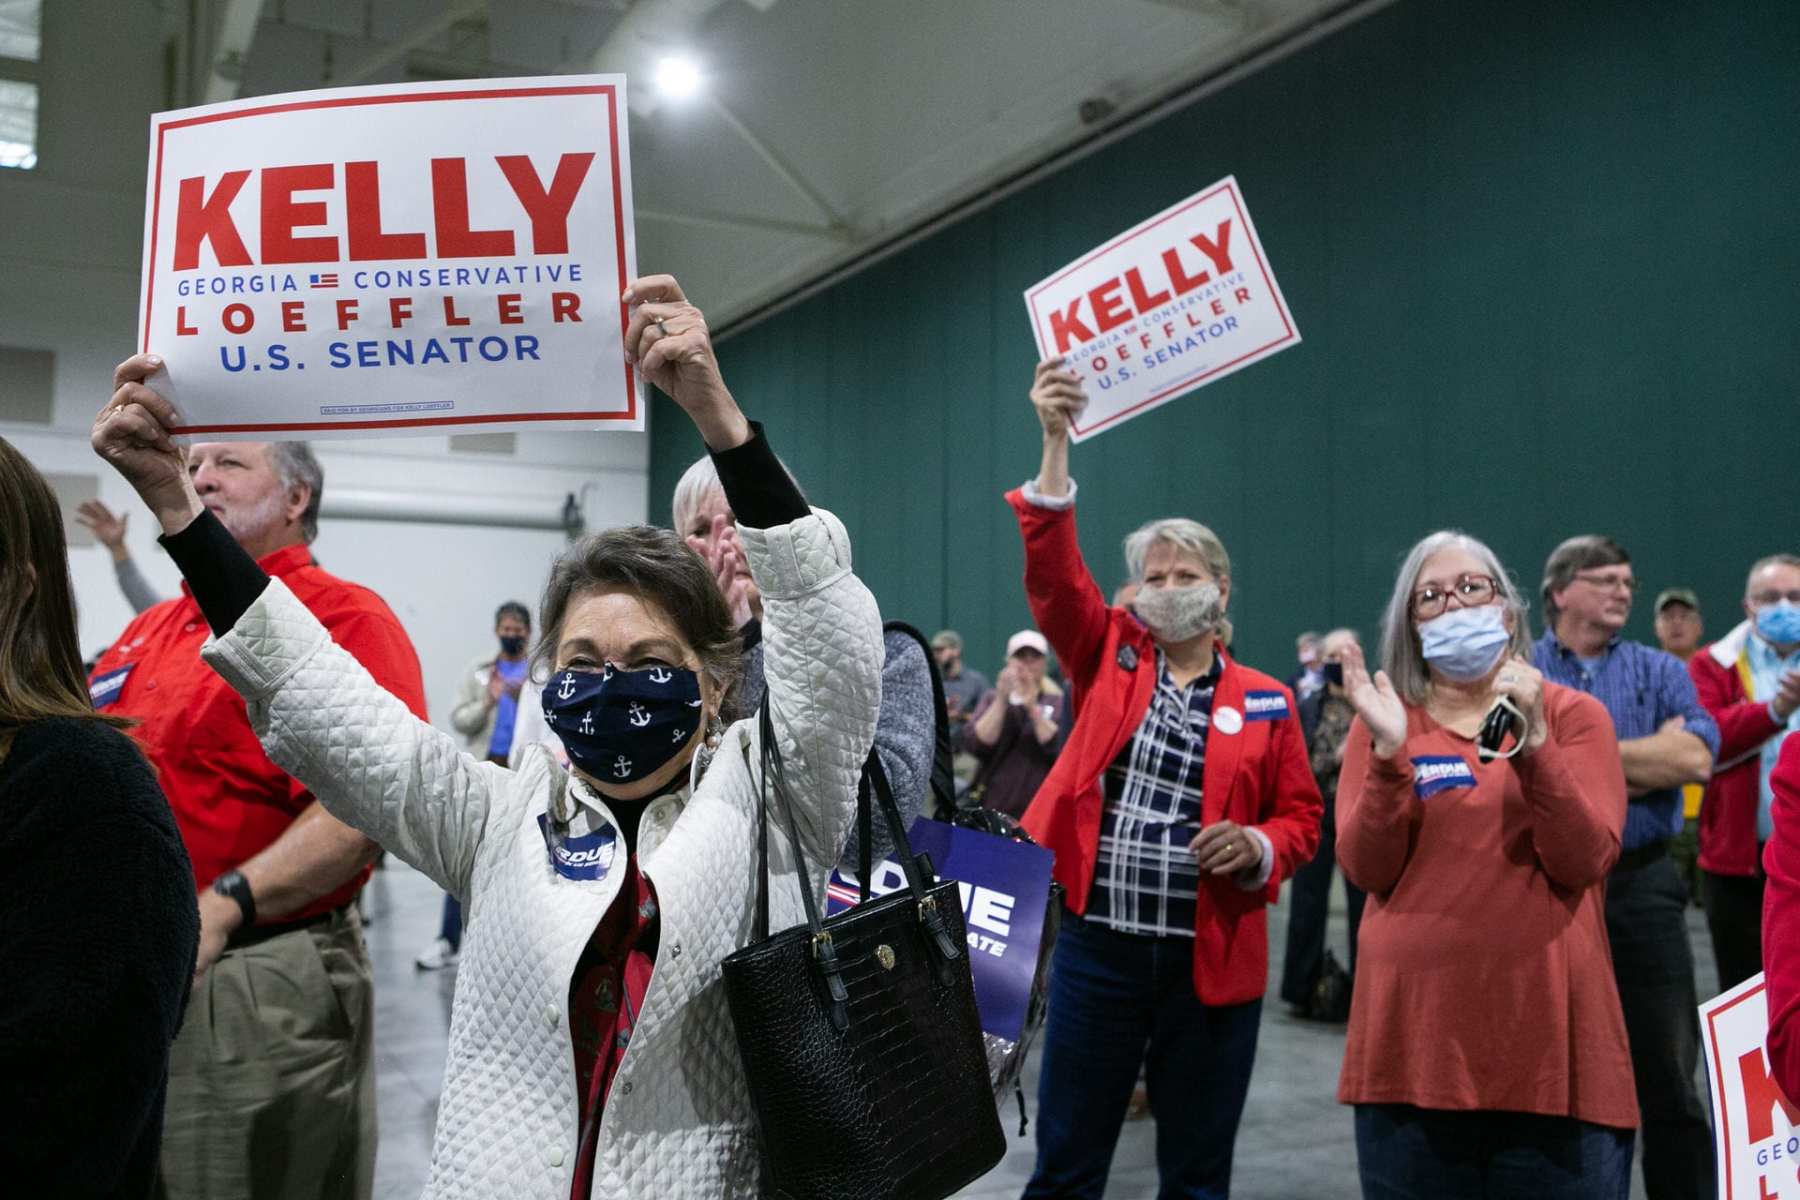 Supporters of Kelly Loeffler hold signs at a rally.